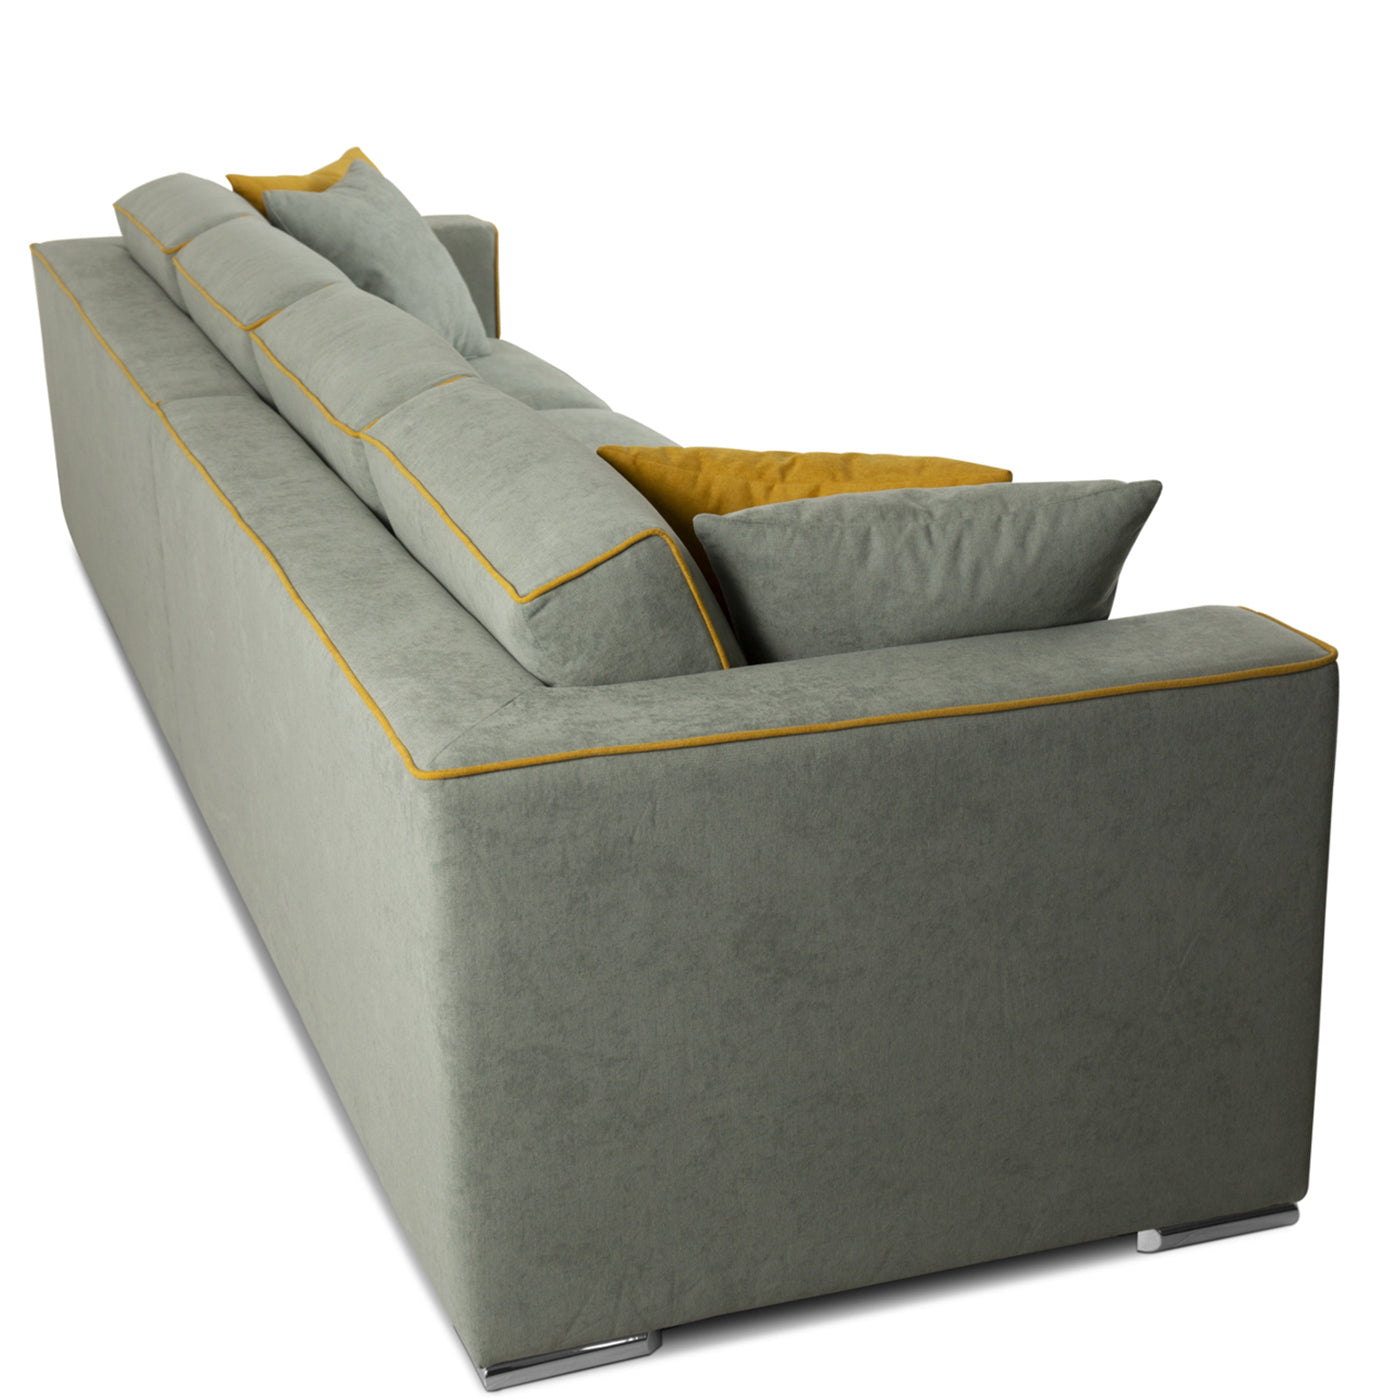 Jackie 6-Seater Gray and Yellow Sofa - Alternative view 1